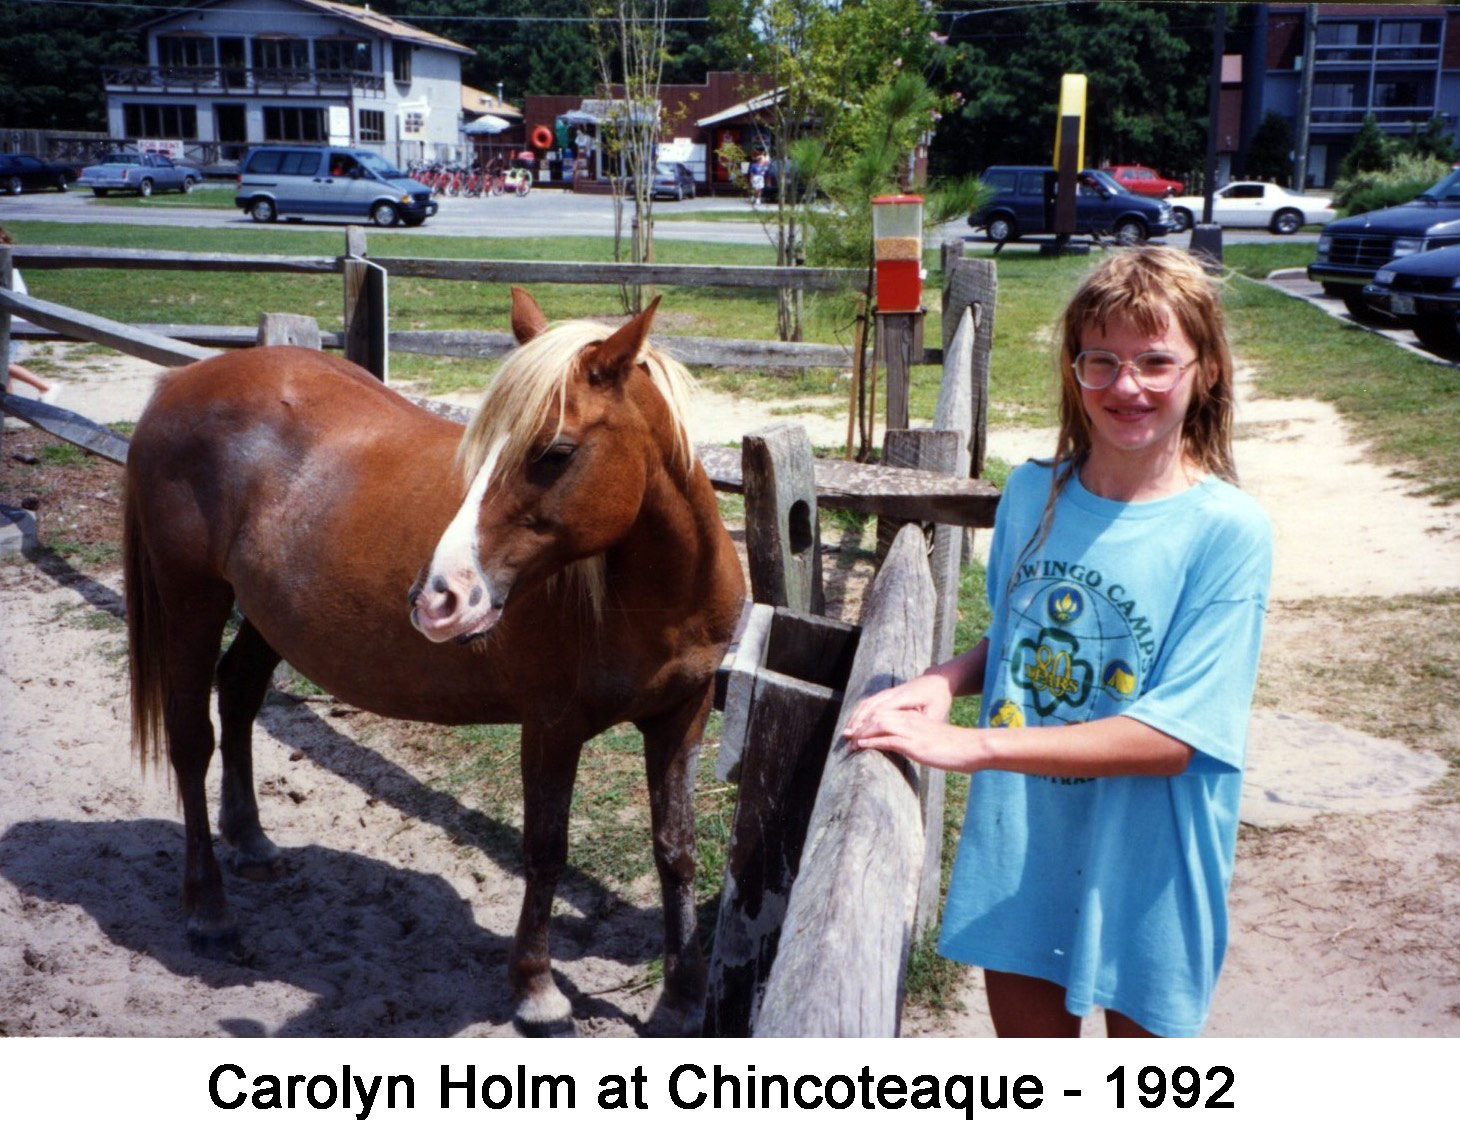 Carolyn Holm standing by a fence with a pony on the other side